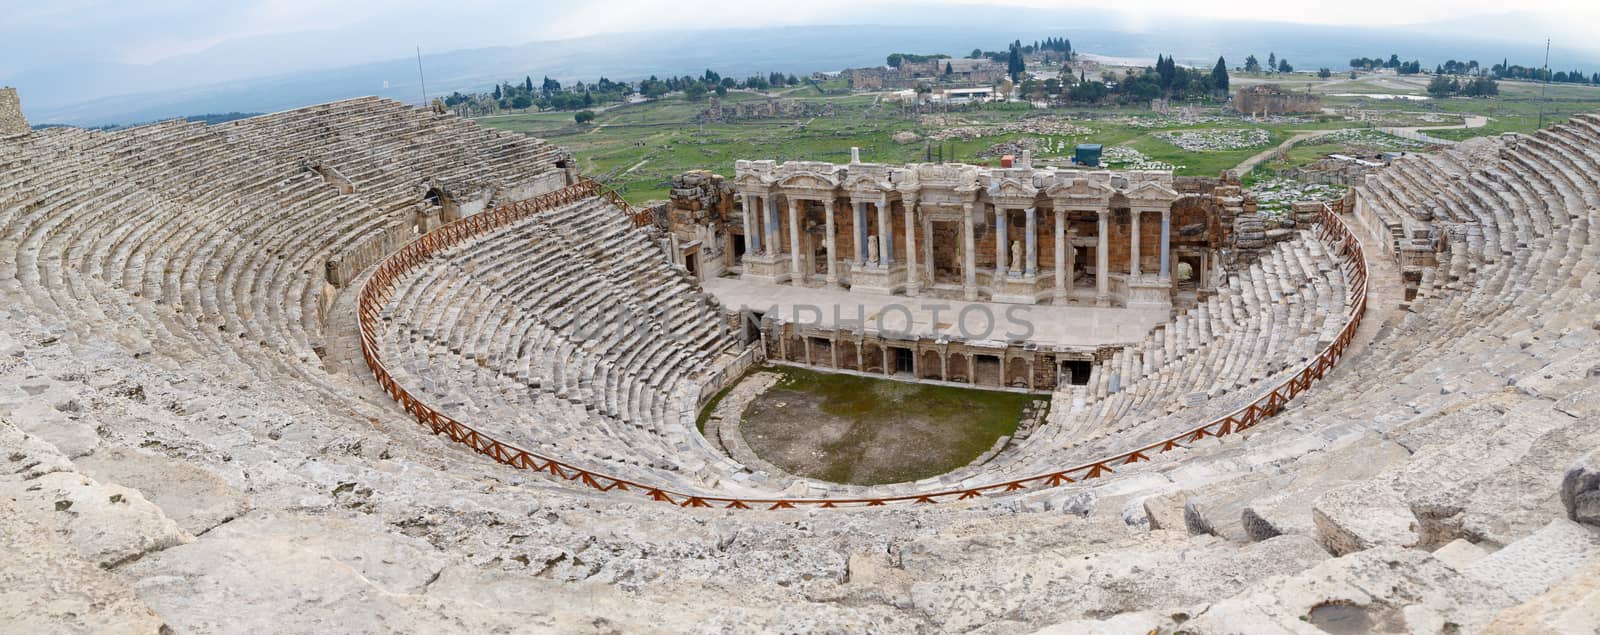 View of Hyerapolis Ancient City with a historical stone amphitheater.